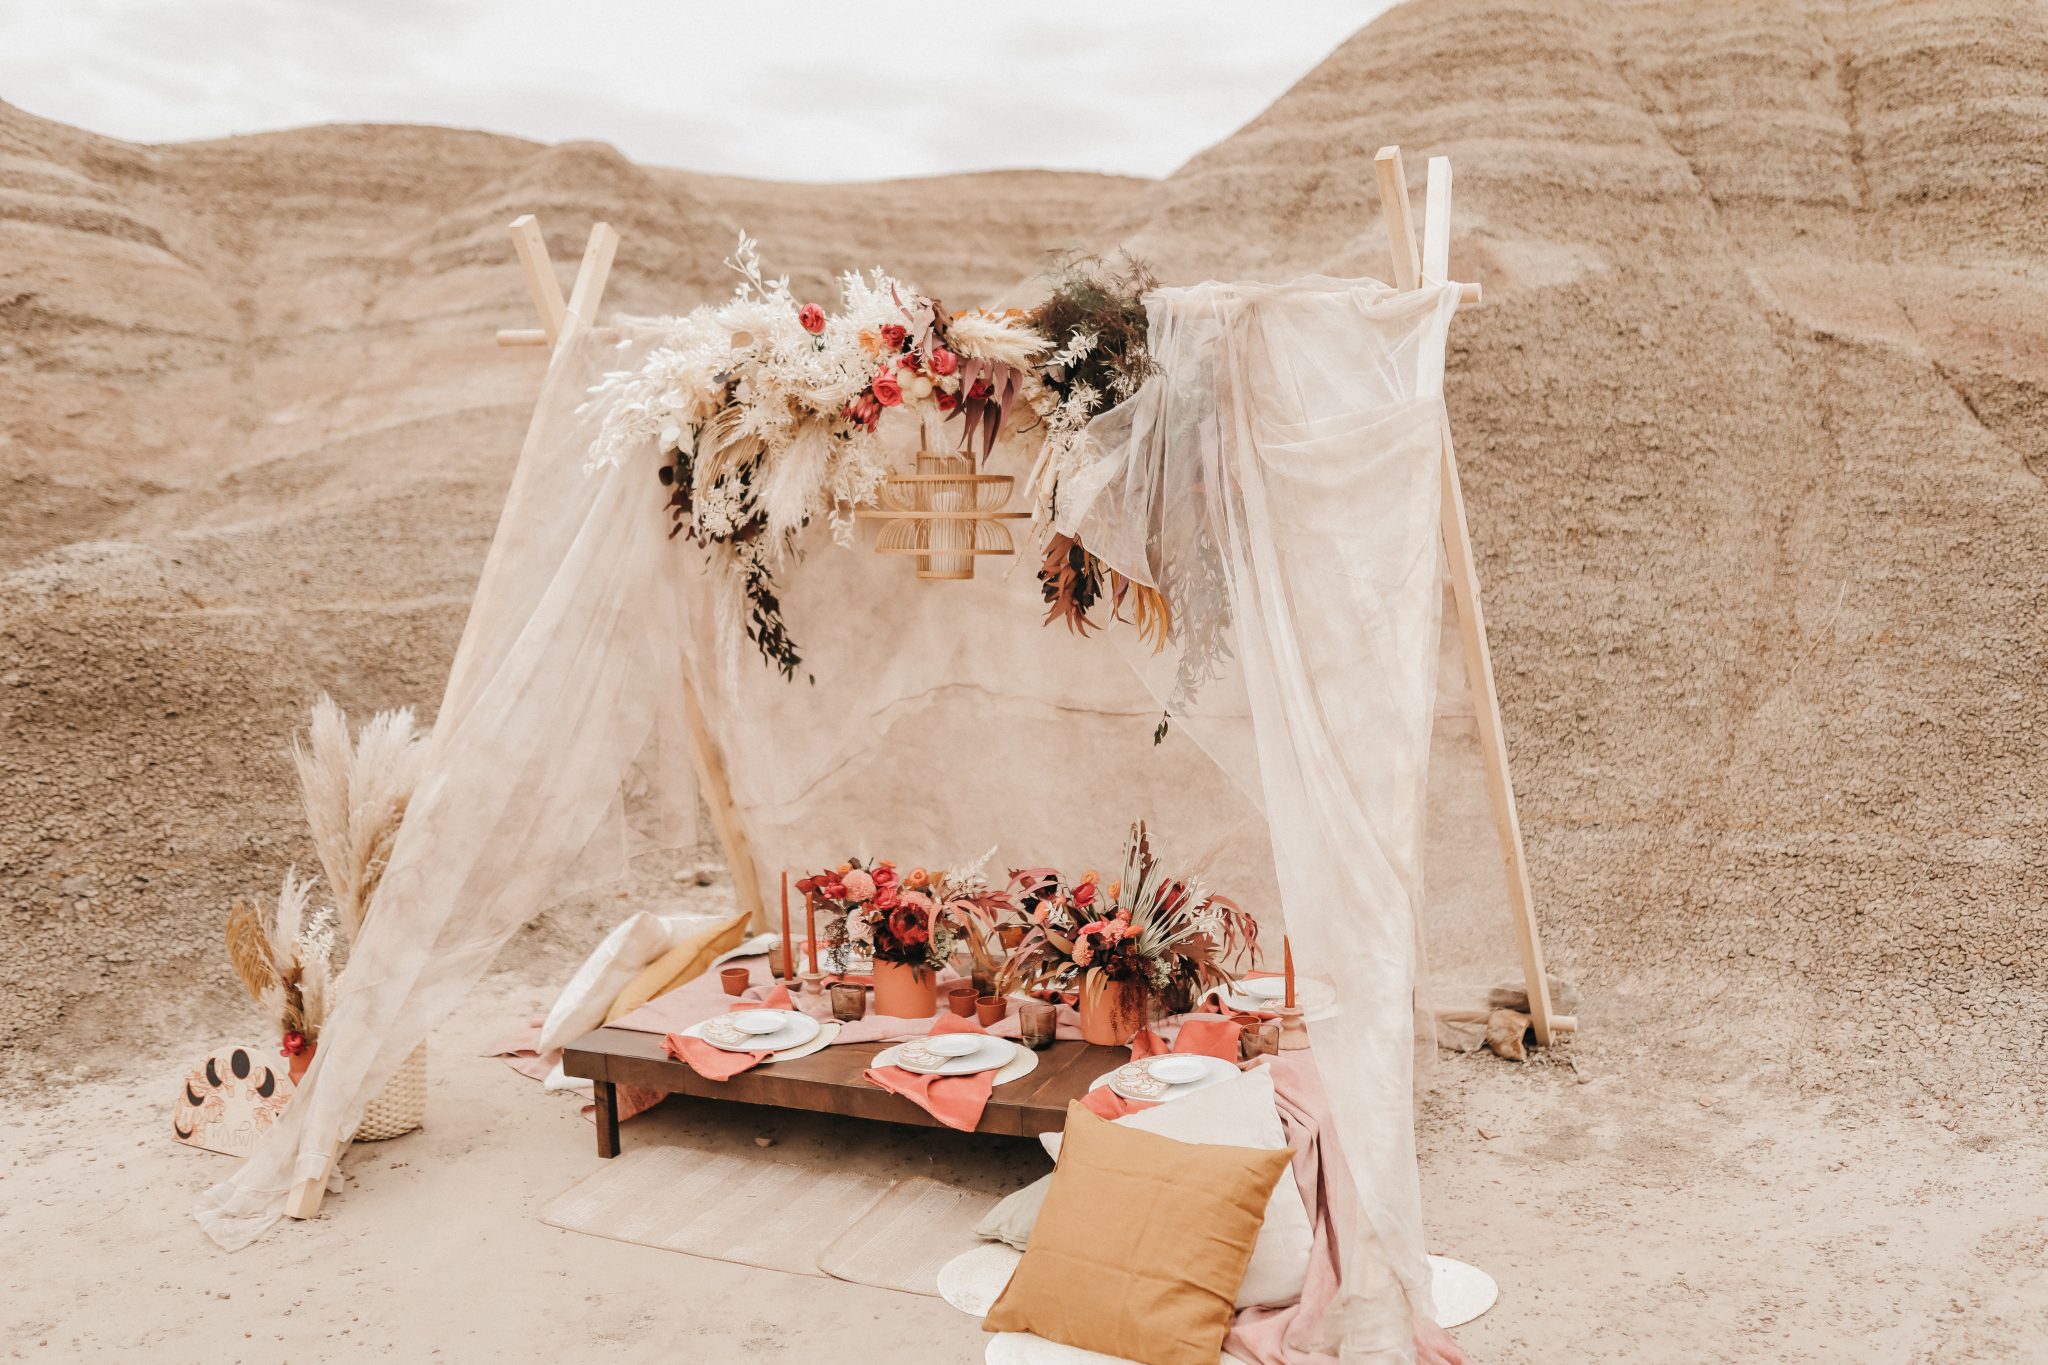 Boho styled tent with terracotta hues, a wicker chandelier and pillows for a Moroccan elopement inspiration